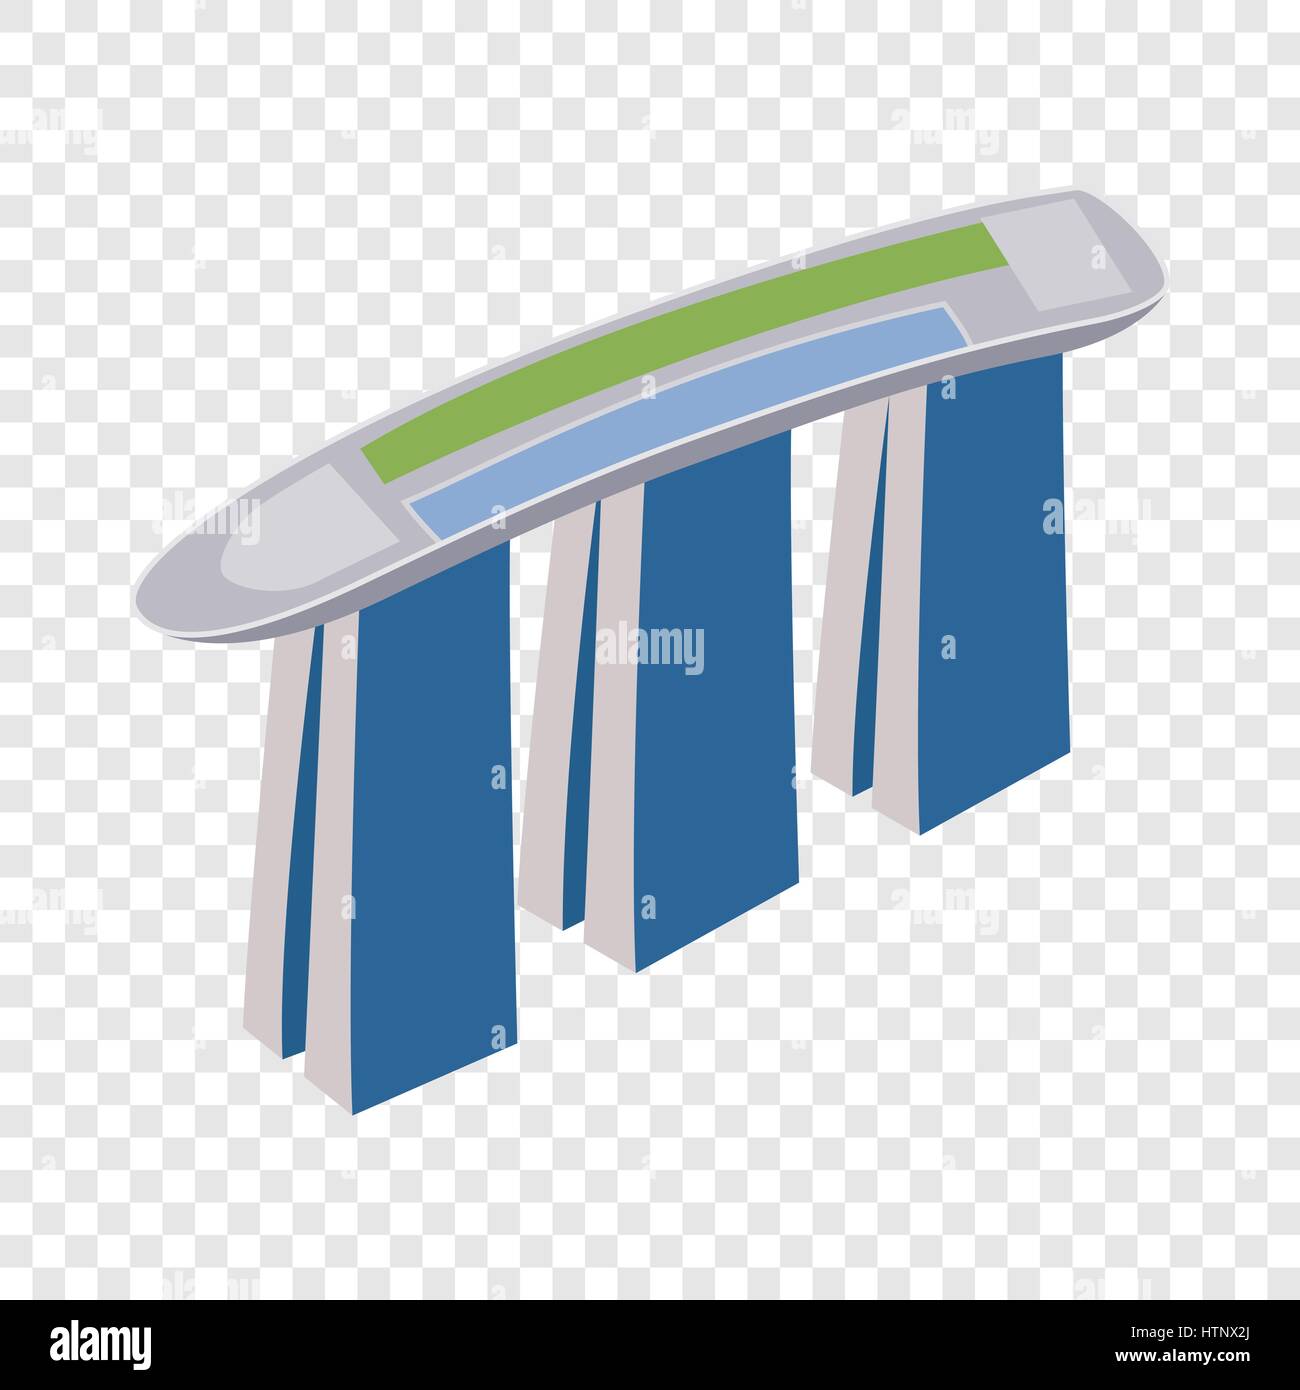 Marina Bay Sands hotel in Singapore isometric icon Stock Vector